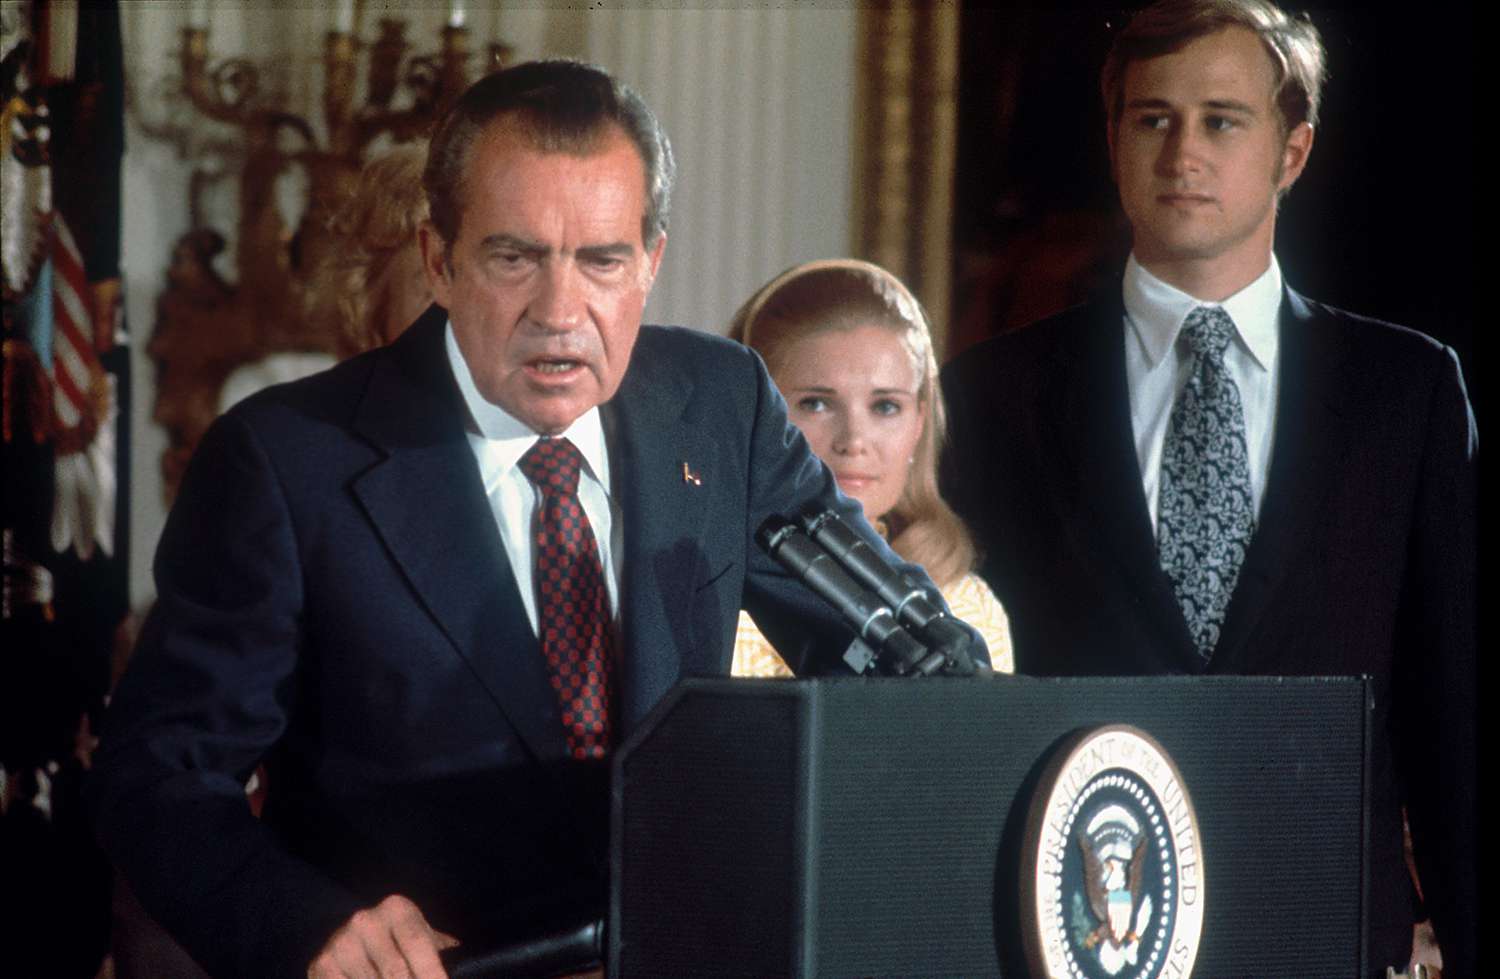 Richard Nixon announces his resignation from the White House, 9th August 1974.